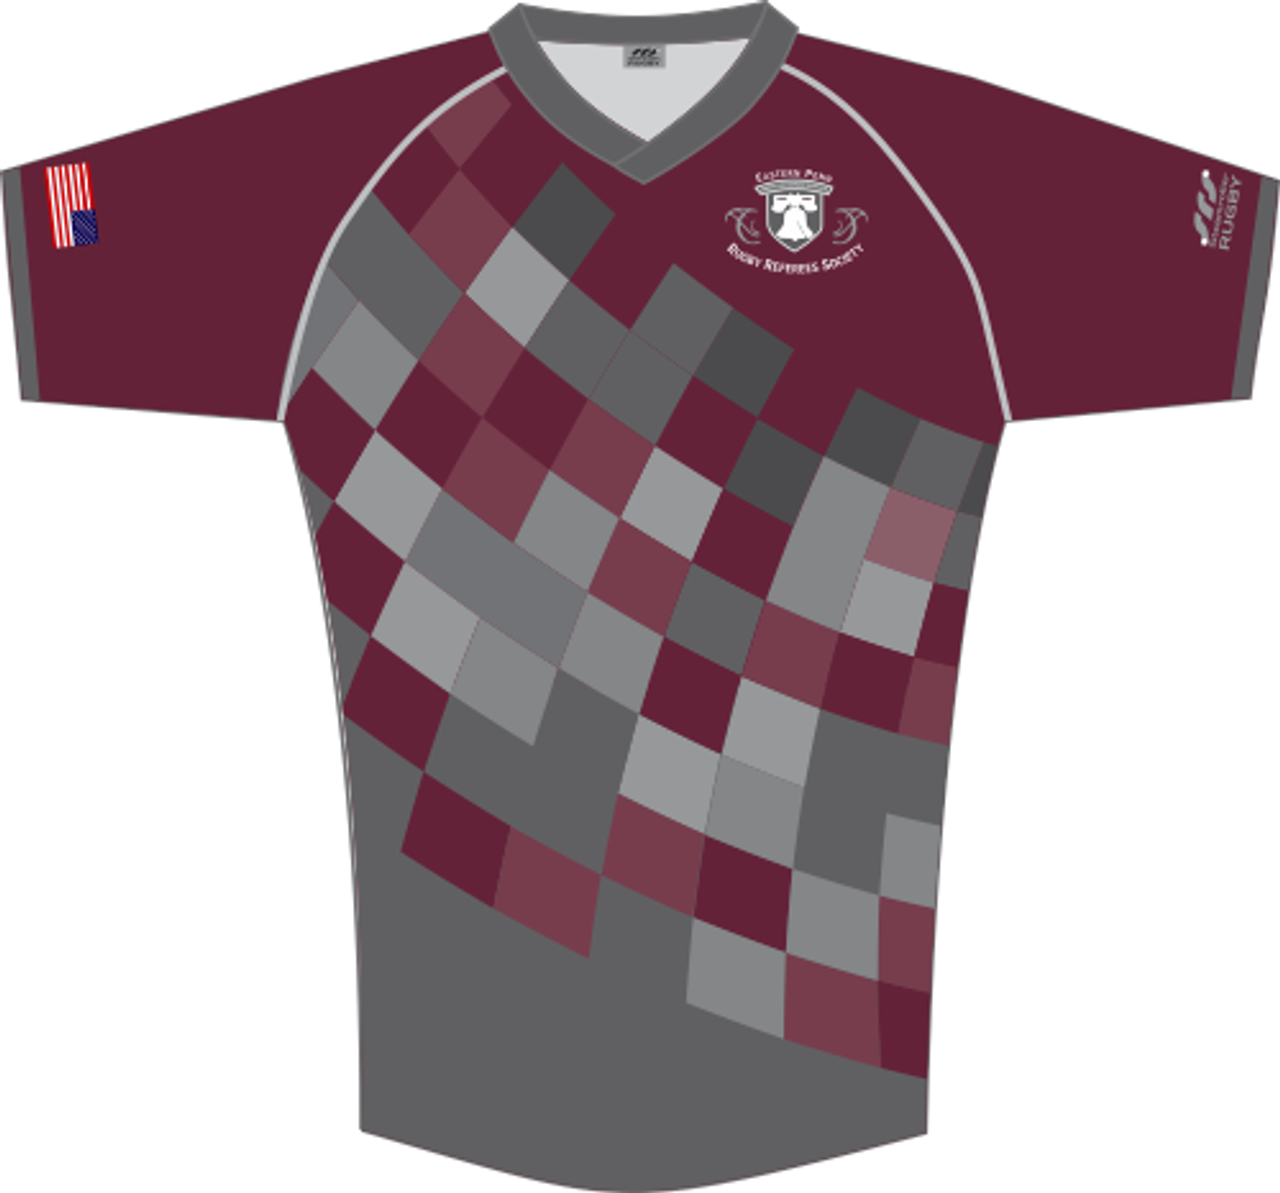 EPRRS 2018/2019 Loose-Cut Jersey, Maroon/Gray